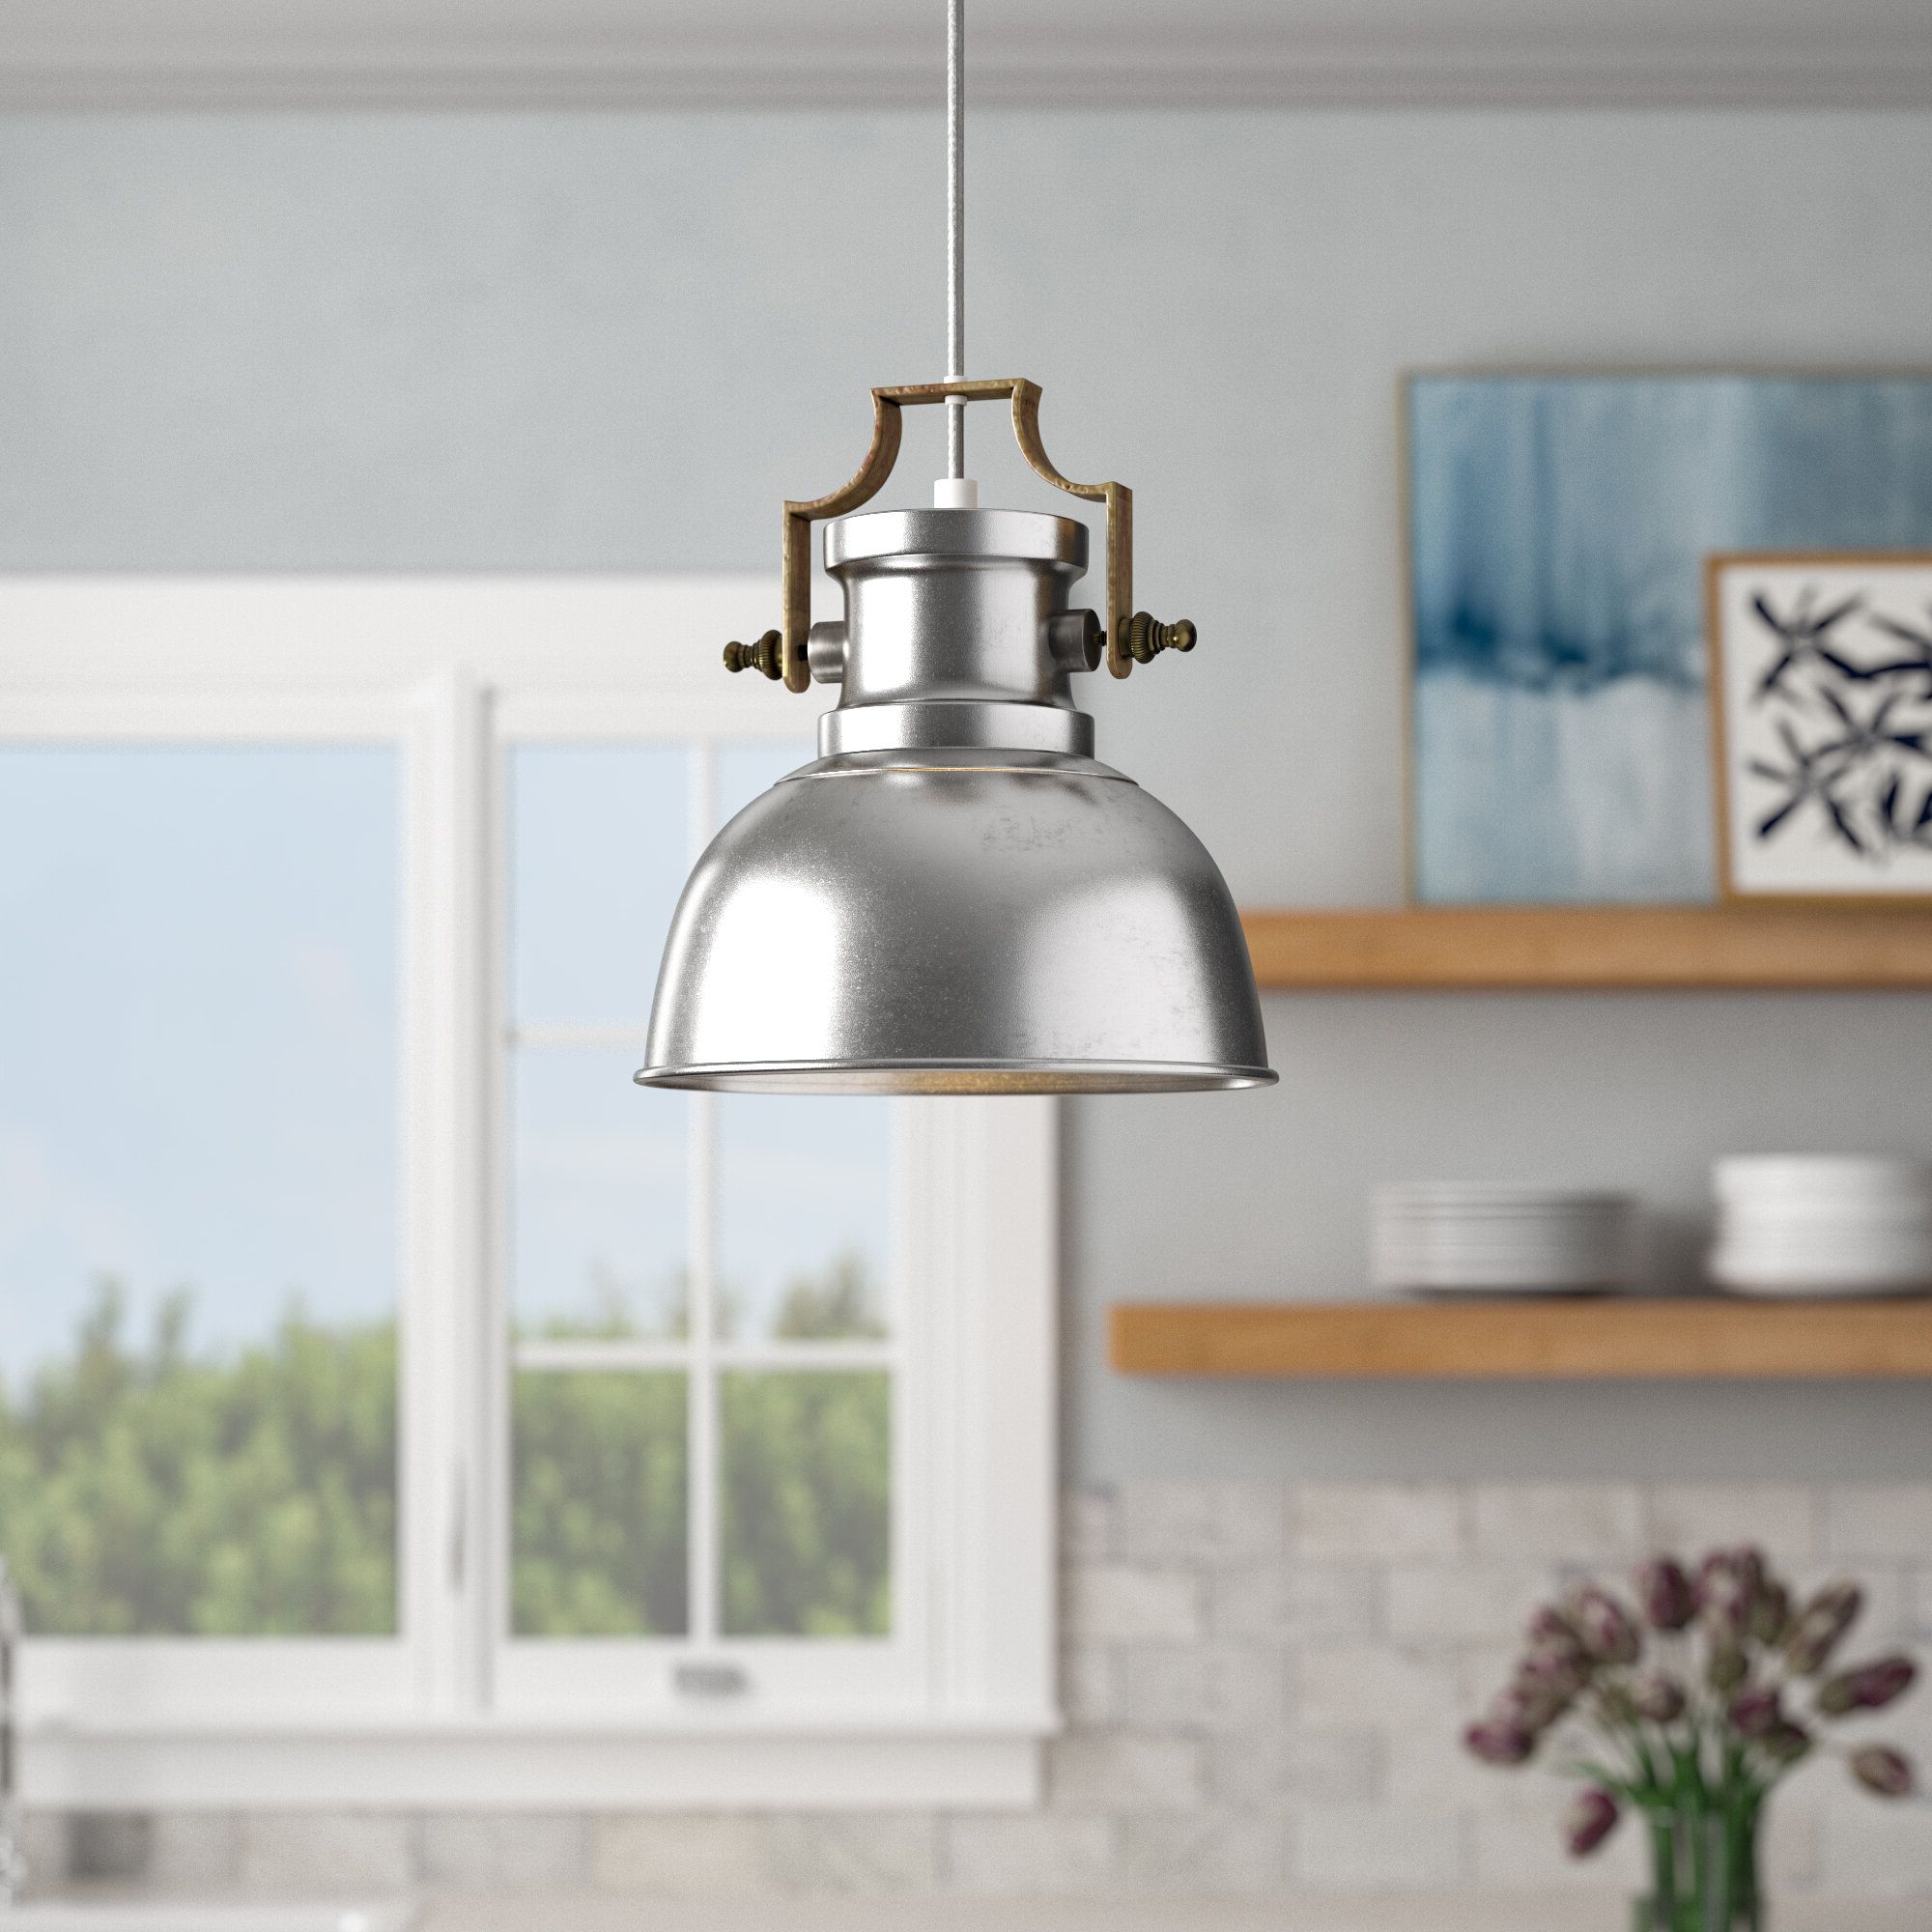 Widely Used Jules 1 Light Single Dome Pendant Regarding Bodalla 1 Light Single Dome Pendants (View 23 of 25)